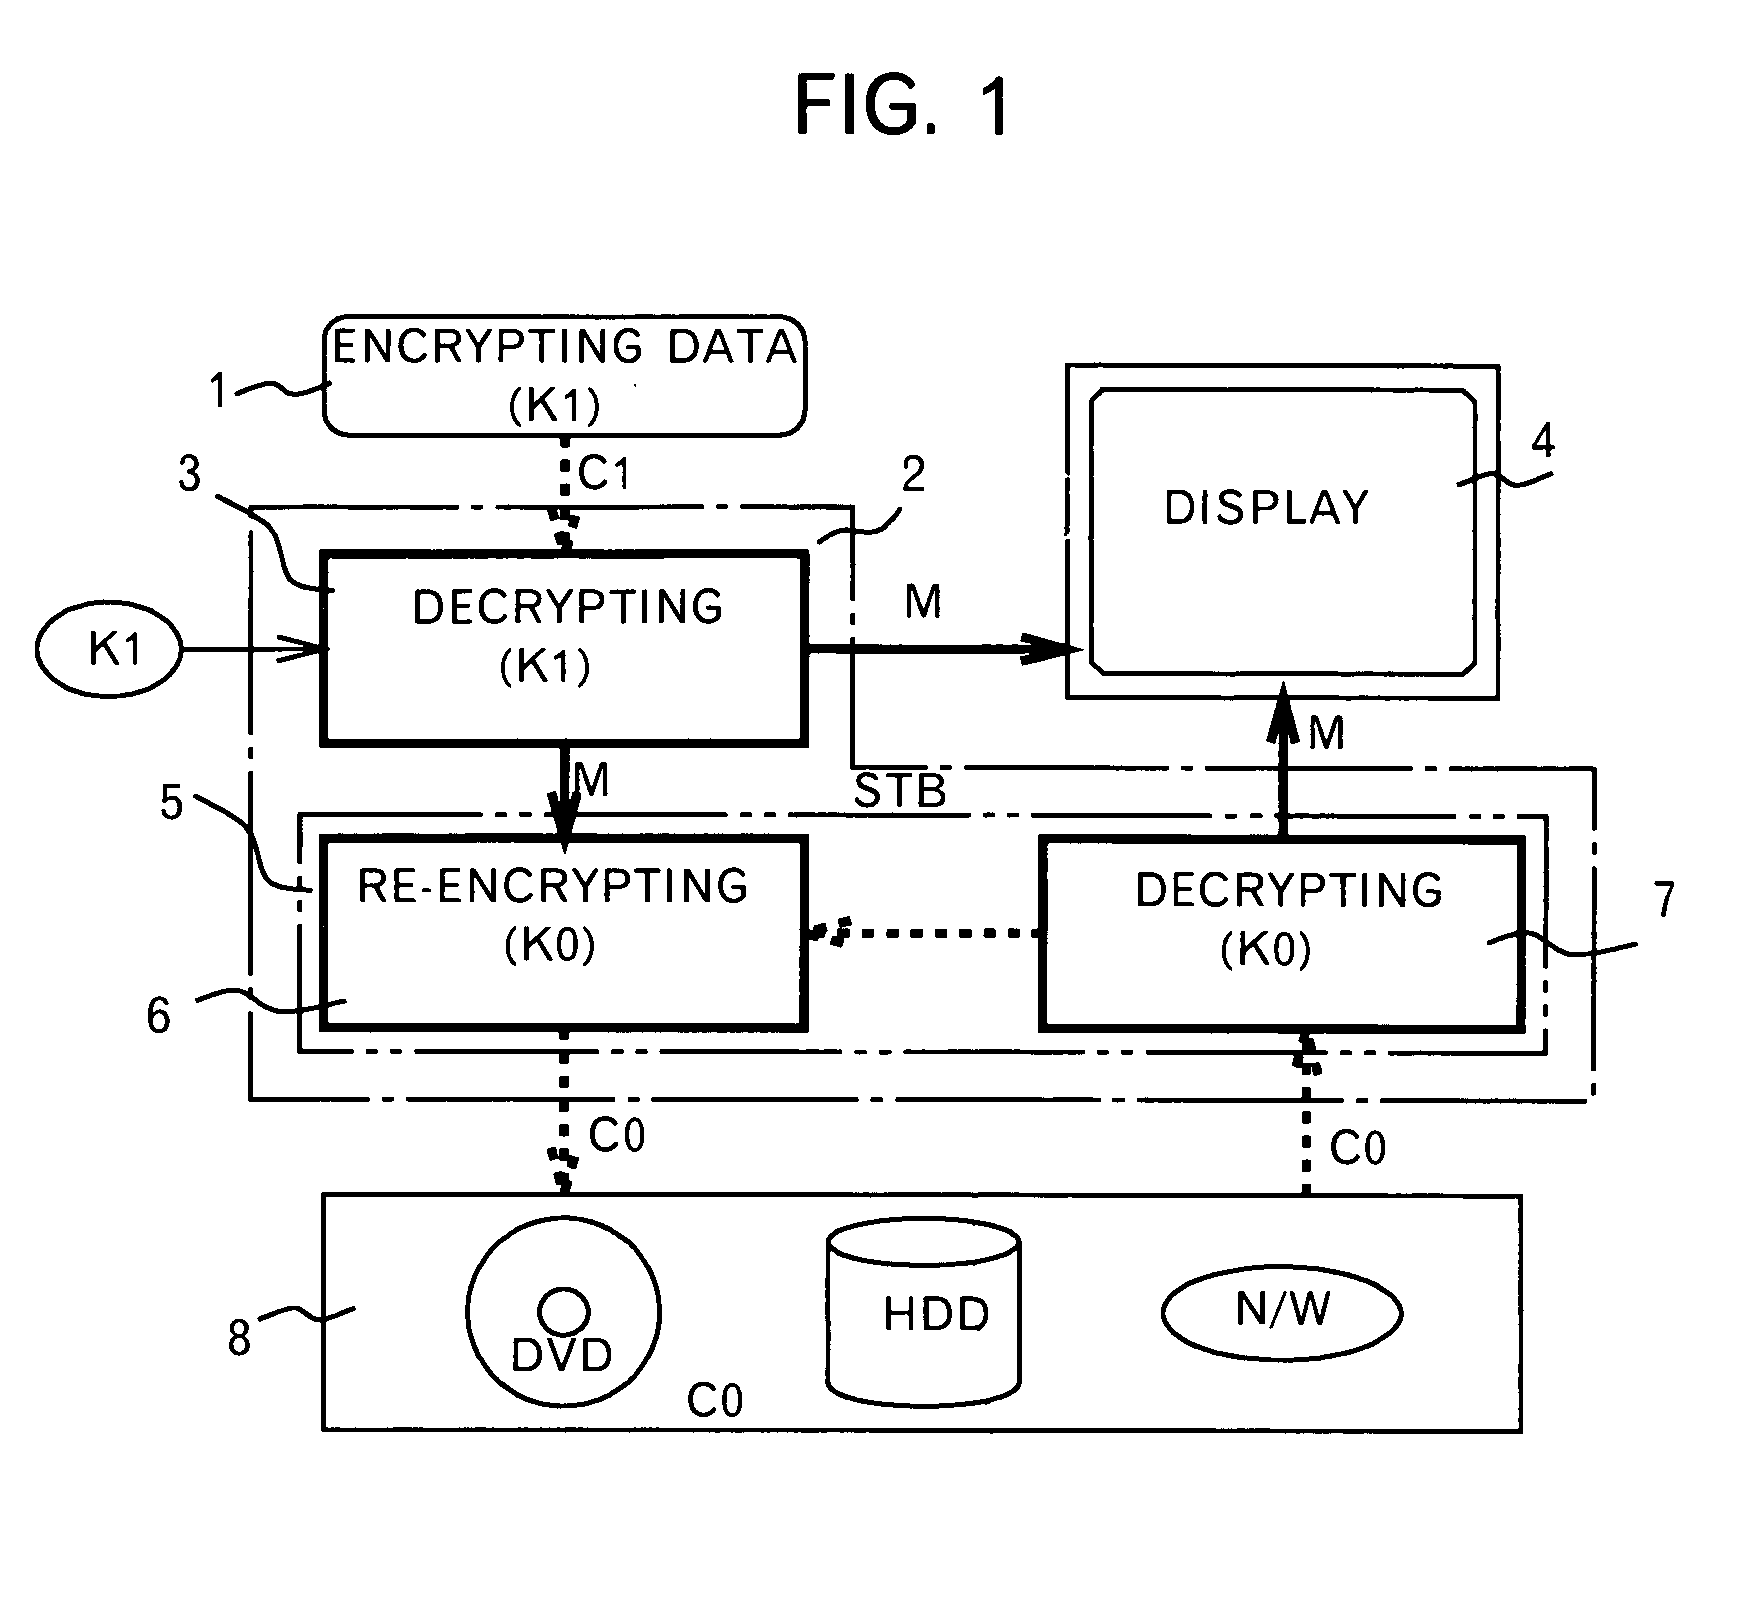 Method and device for protecting digital data by double re-encryption